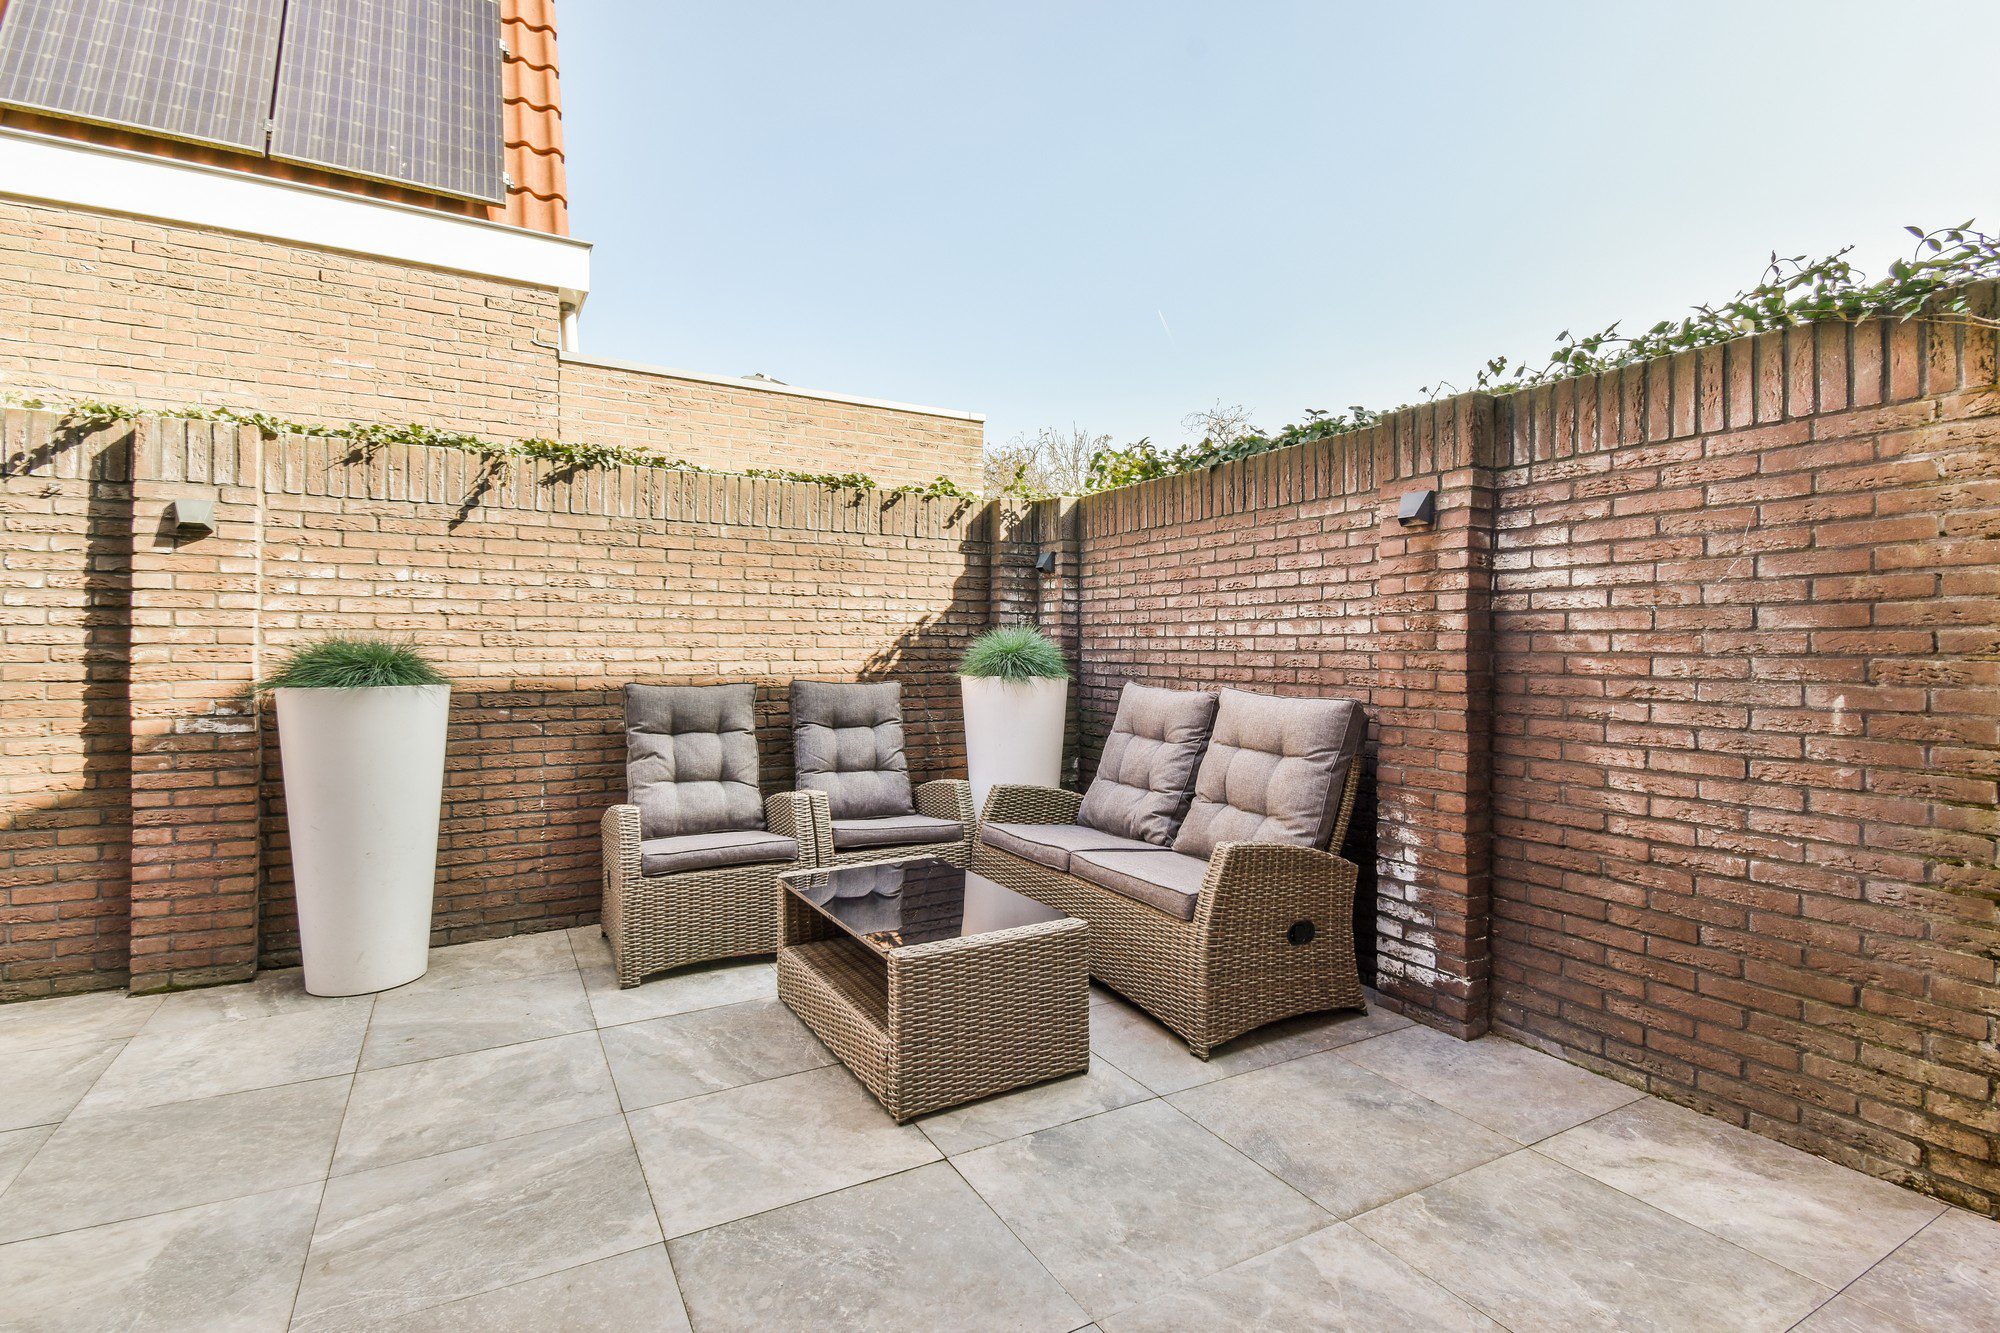 This image shows an outdoor patio area enclosed by brick walls. The patio flooring is made of large, square tiles in a light colour. There is a modern outdoor furniture set that includes two single armchairs, a loveseat, and a matching coffee table, all crafted with a wicker-like material and fitted with gray cushions. To the left, there's a tall white planter with green foliage. On the walls, there are some climbing plants and what appears to be a solar panel mounted near the roof. The weather seems to be sunny, and the sky is clear. No people are visible in the image.